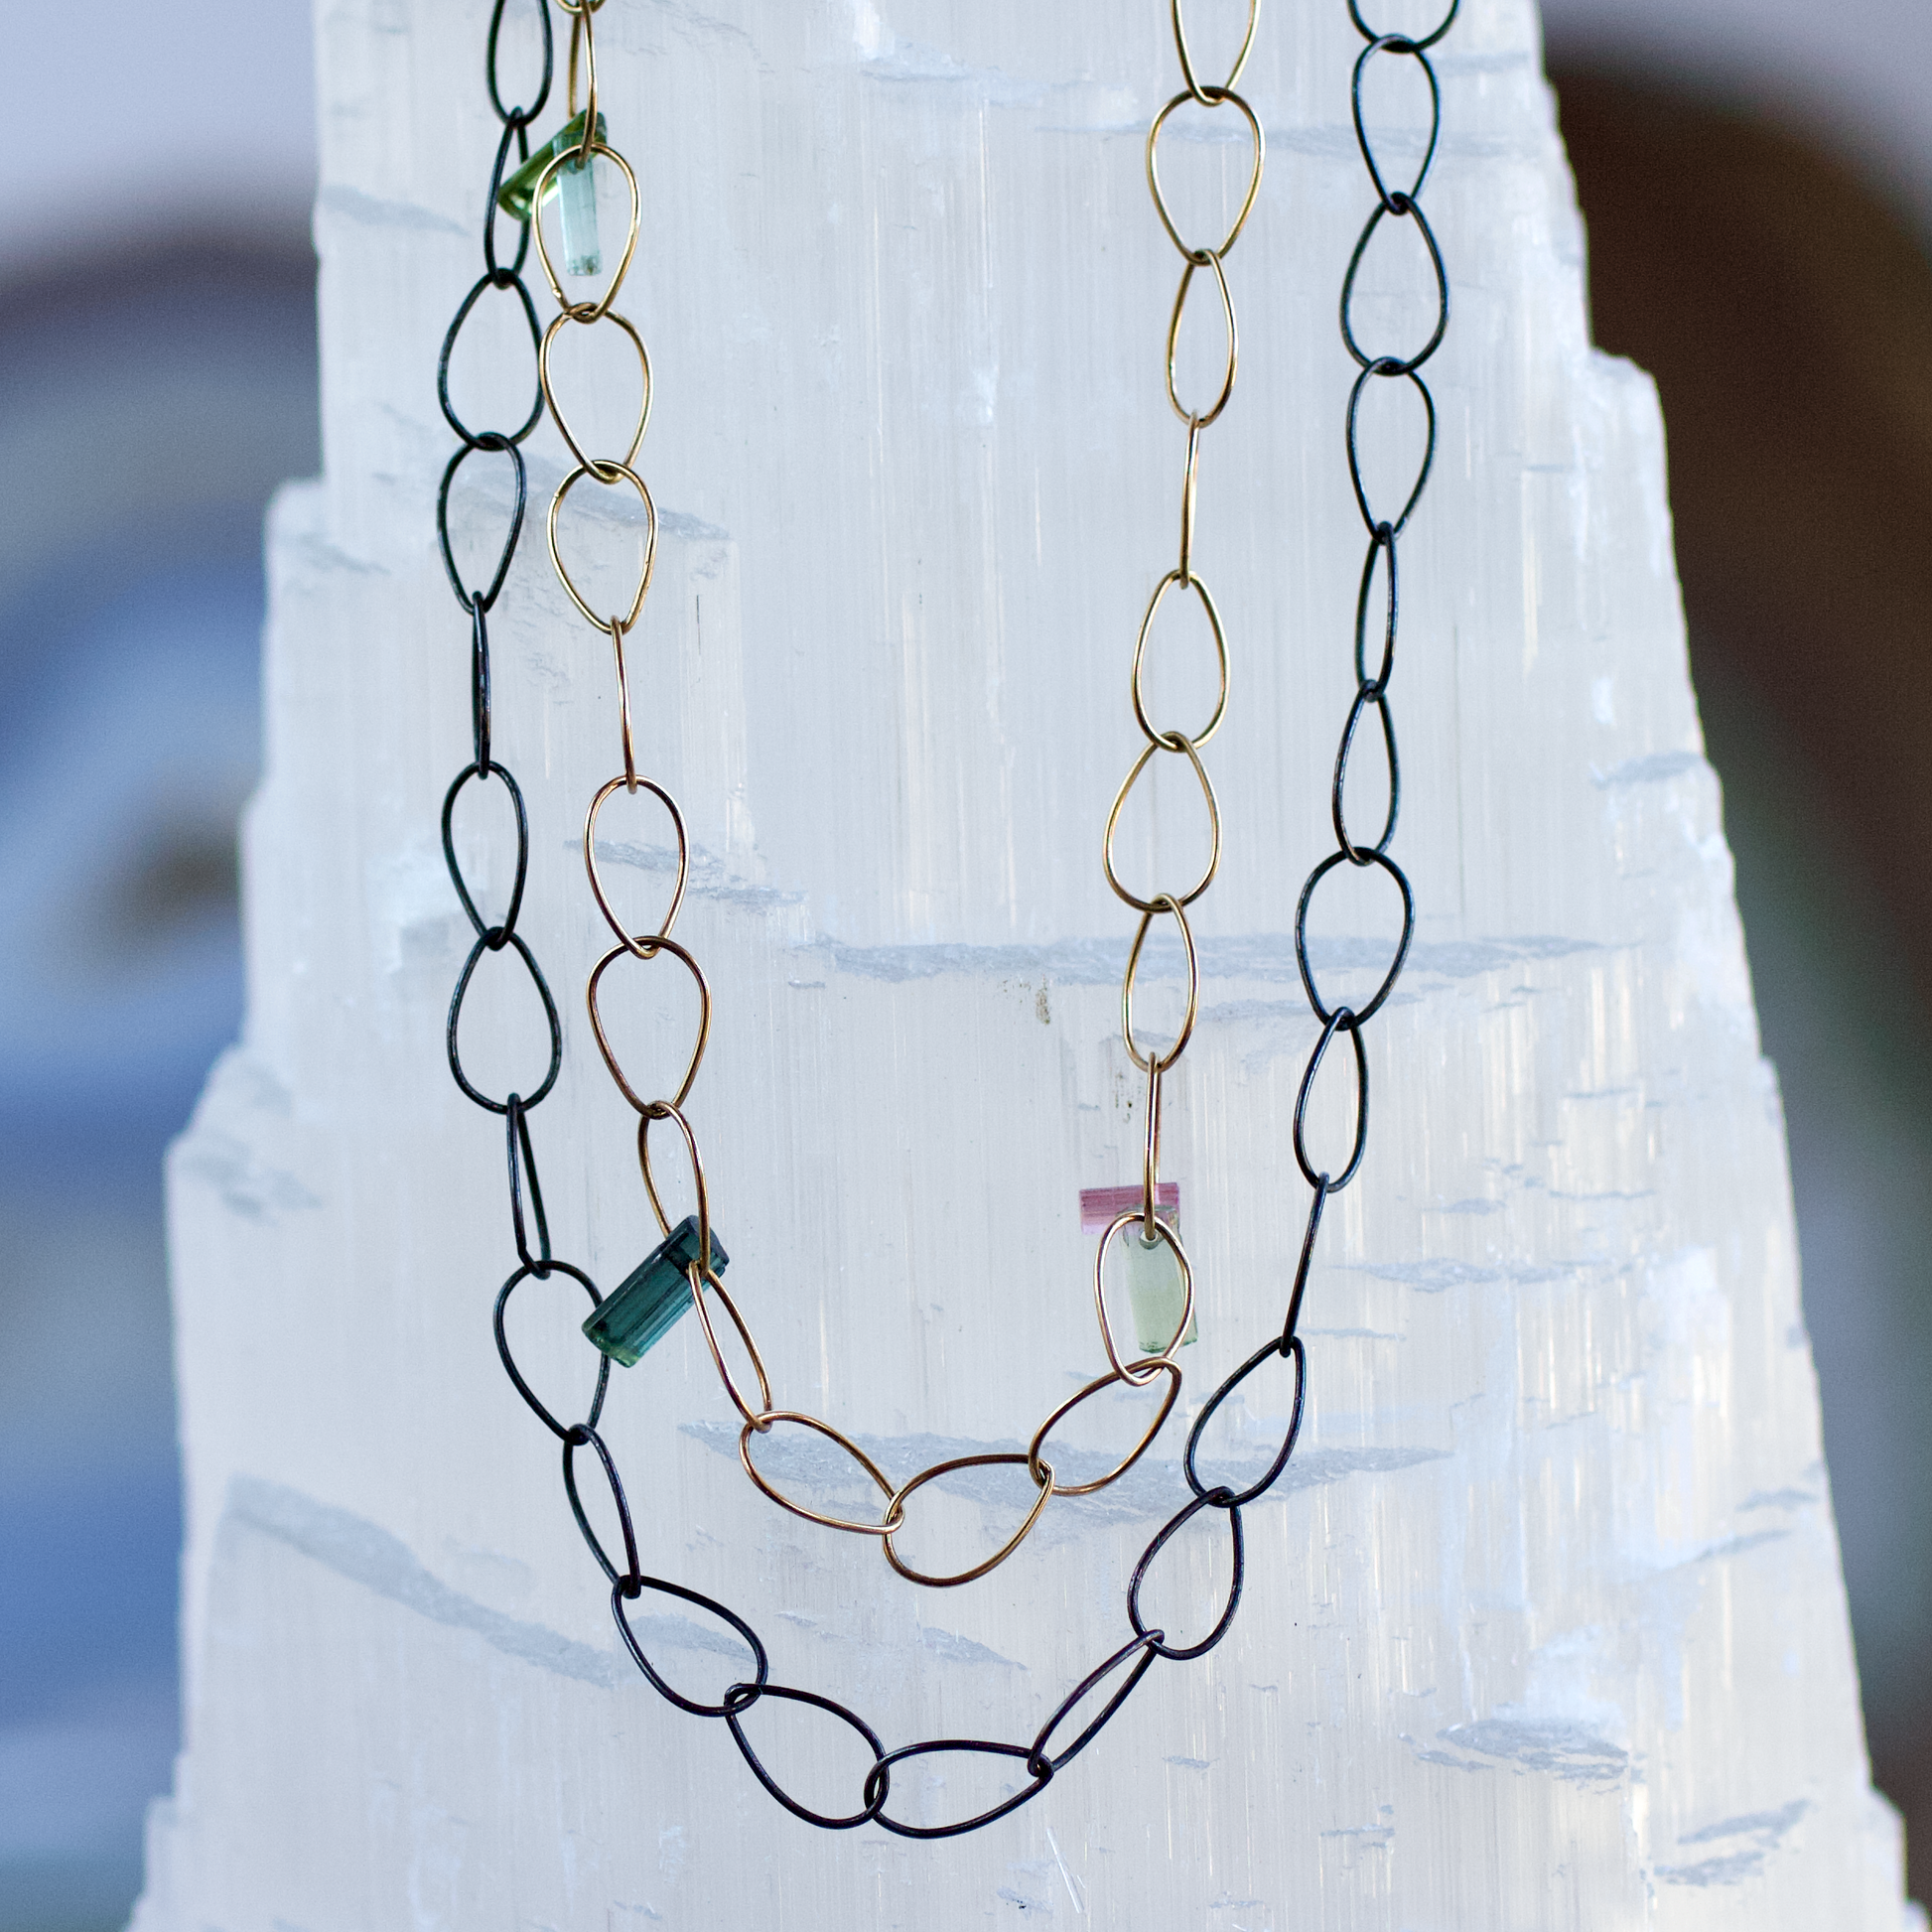 Mixed Metals Gold Pear Link Chain Necklace with Tourmaline